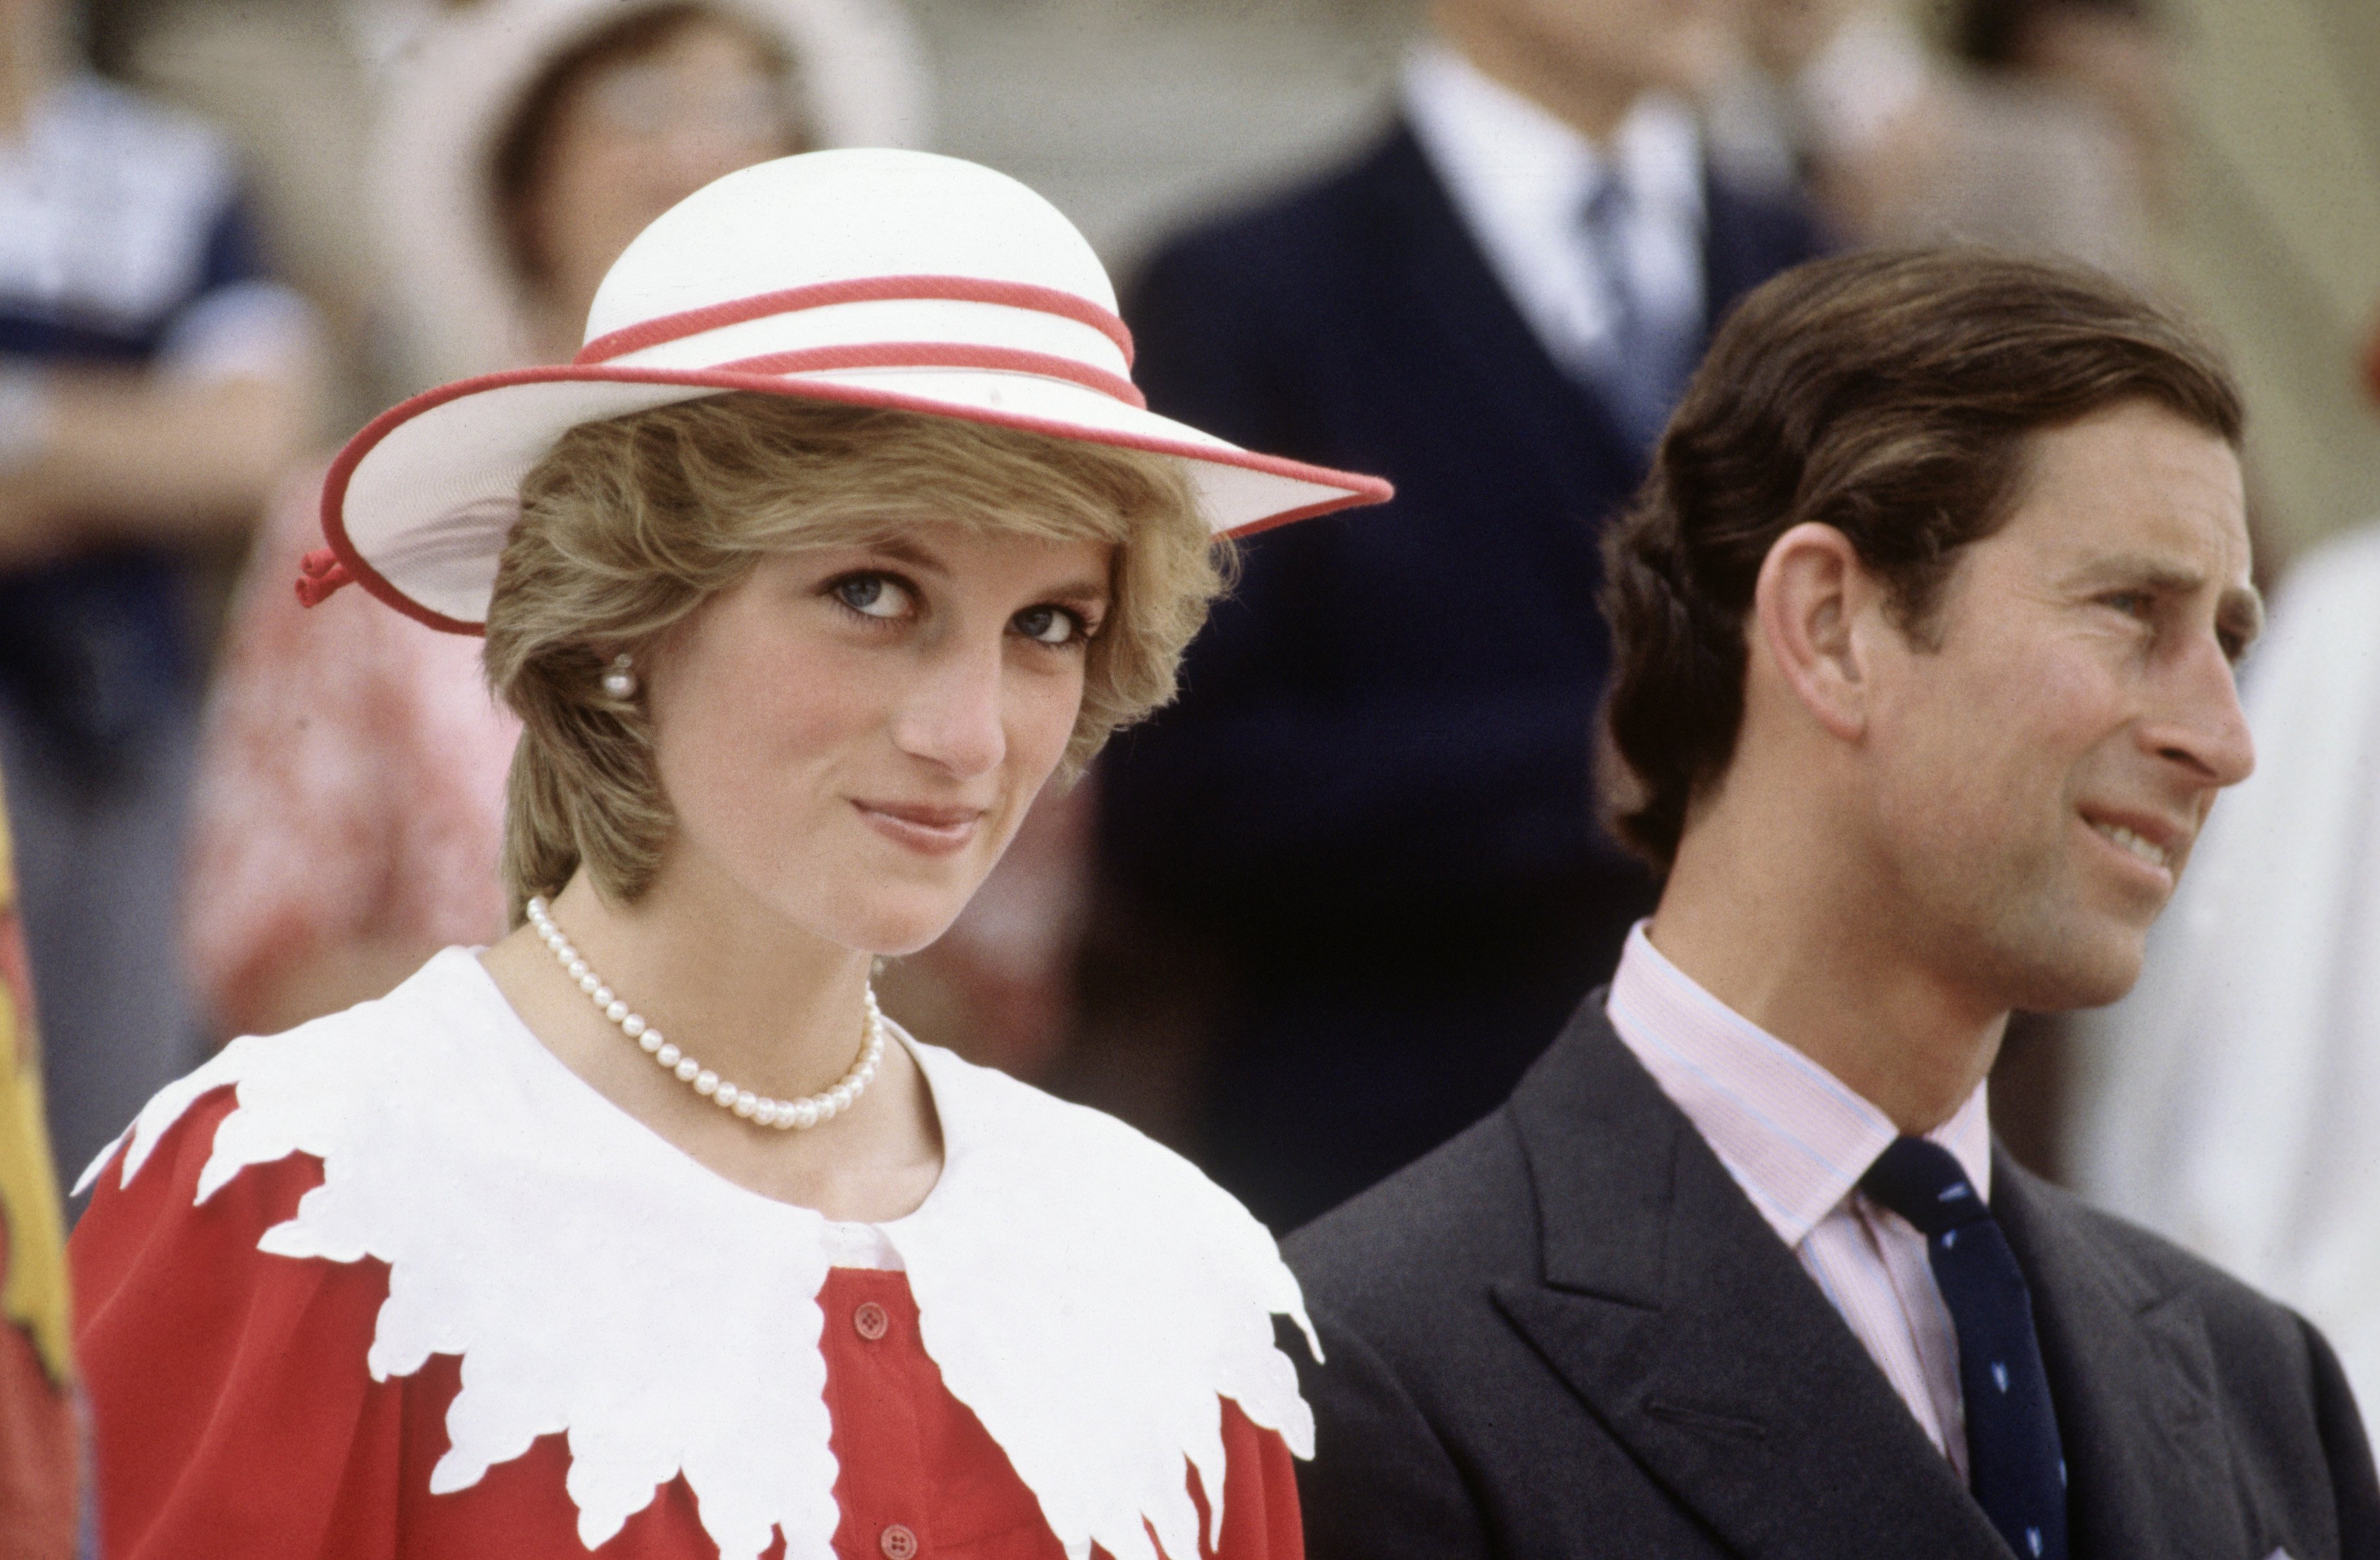 Diana Princess of Wales and Prince Charles during the Royal Tour of Canada on June 29, 1983, in Edmonton, Alberta, Canada. | Source: Getty Images. 